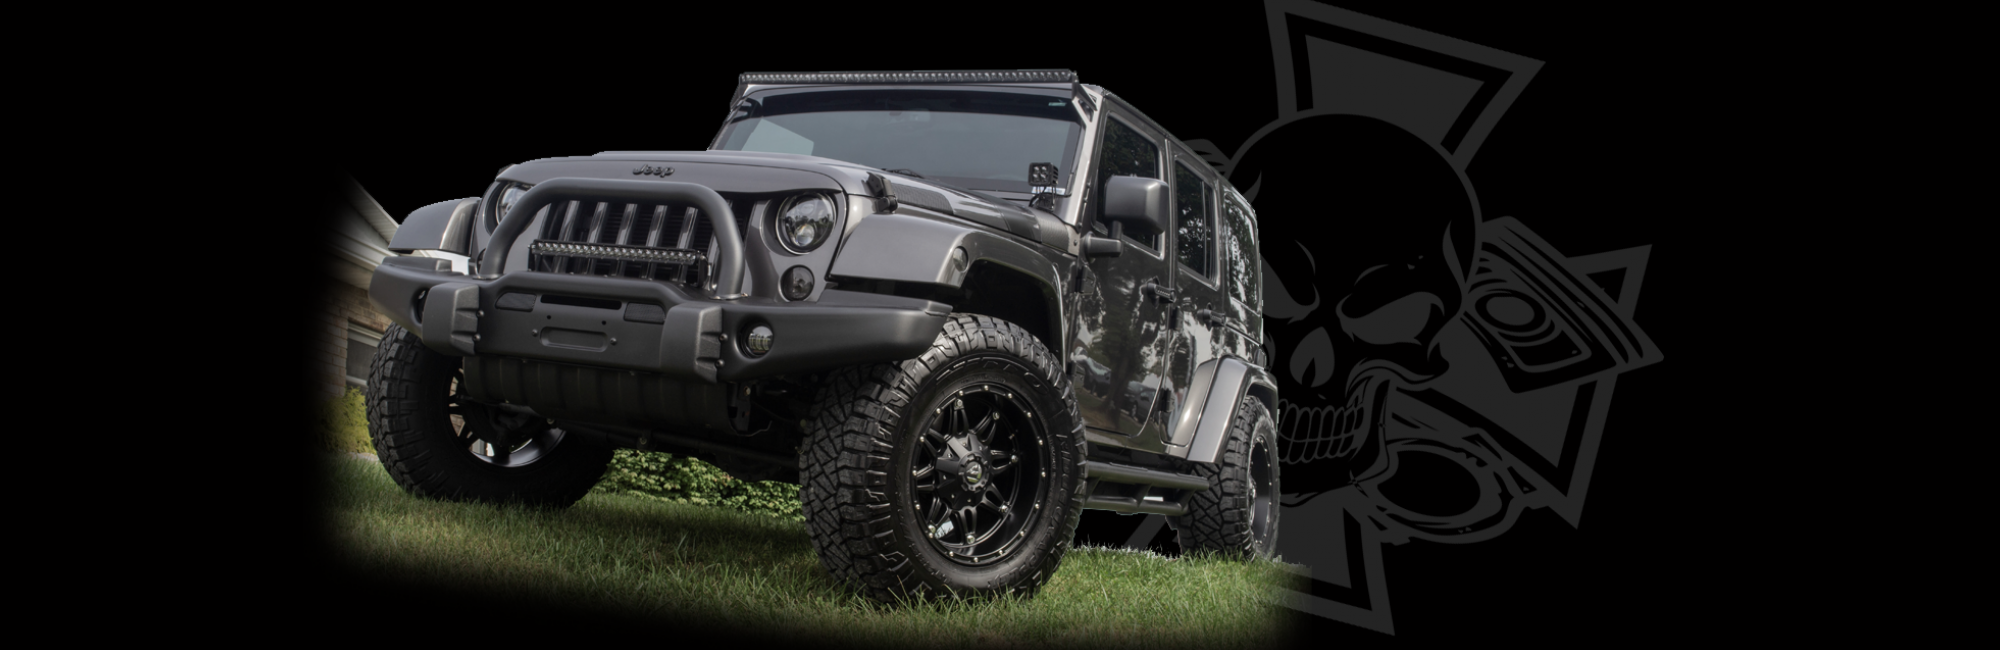 Jeep JK Wheels and Tires 